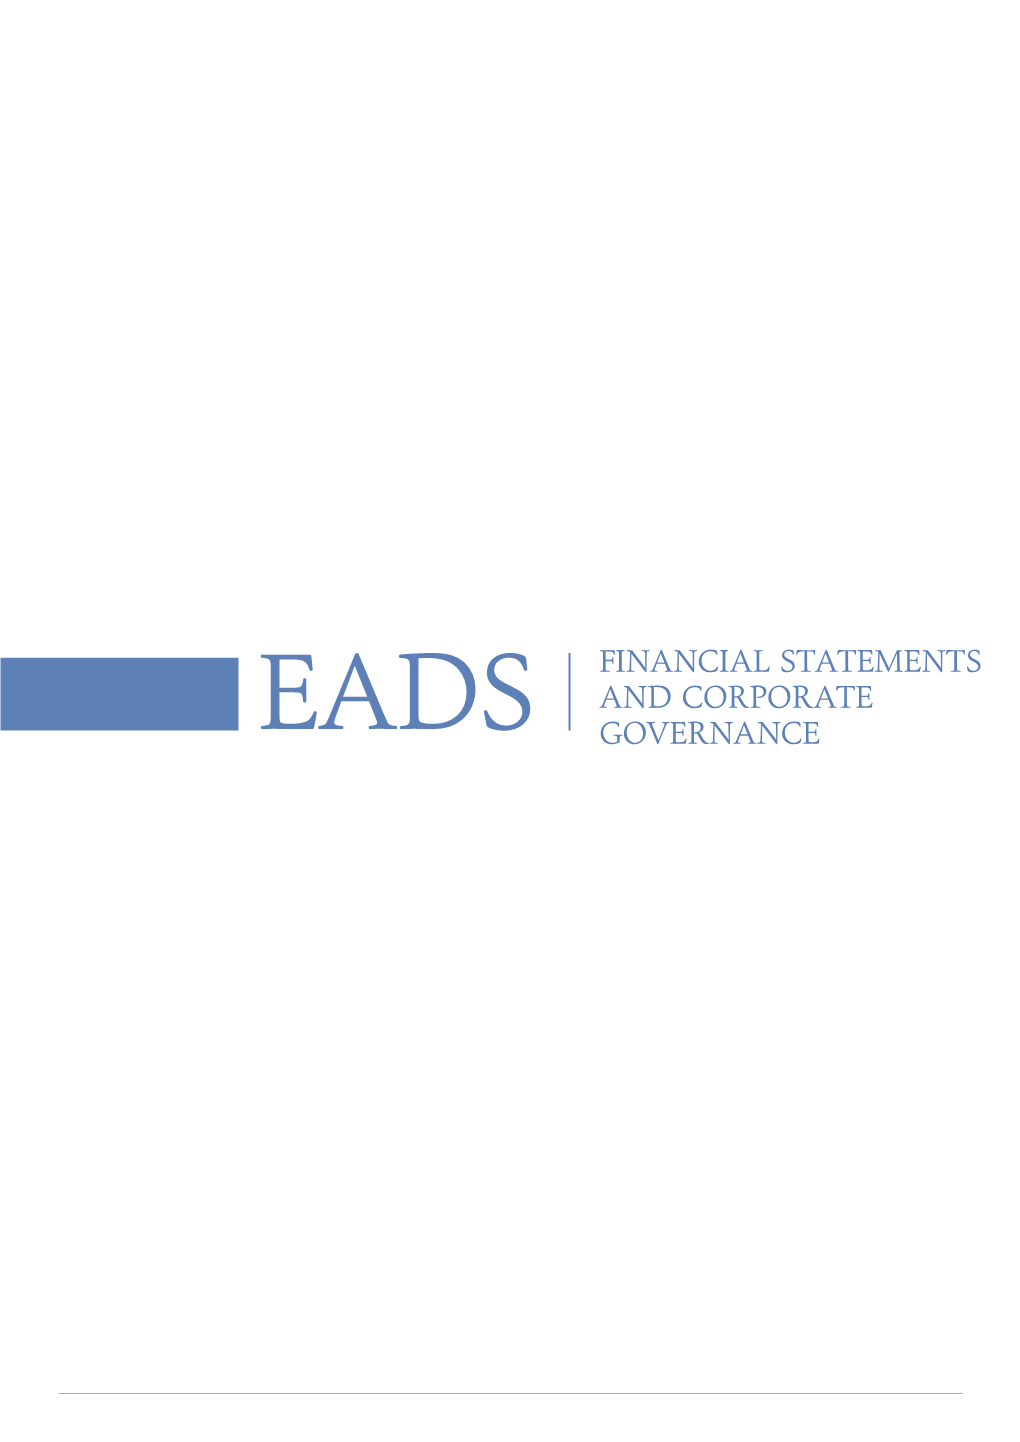 EADS Financial Statements and Corporate Governance